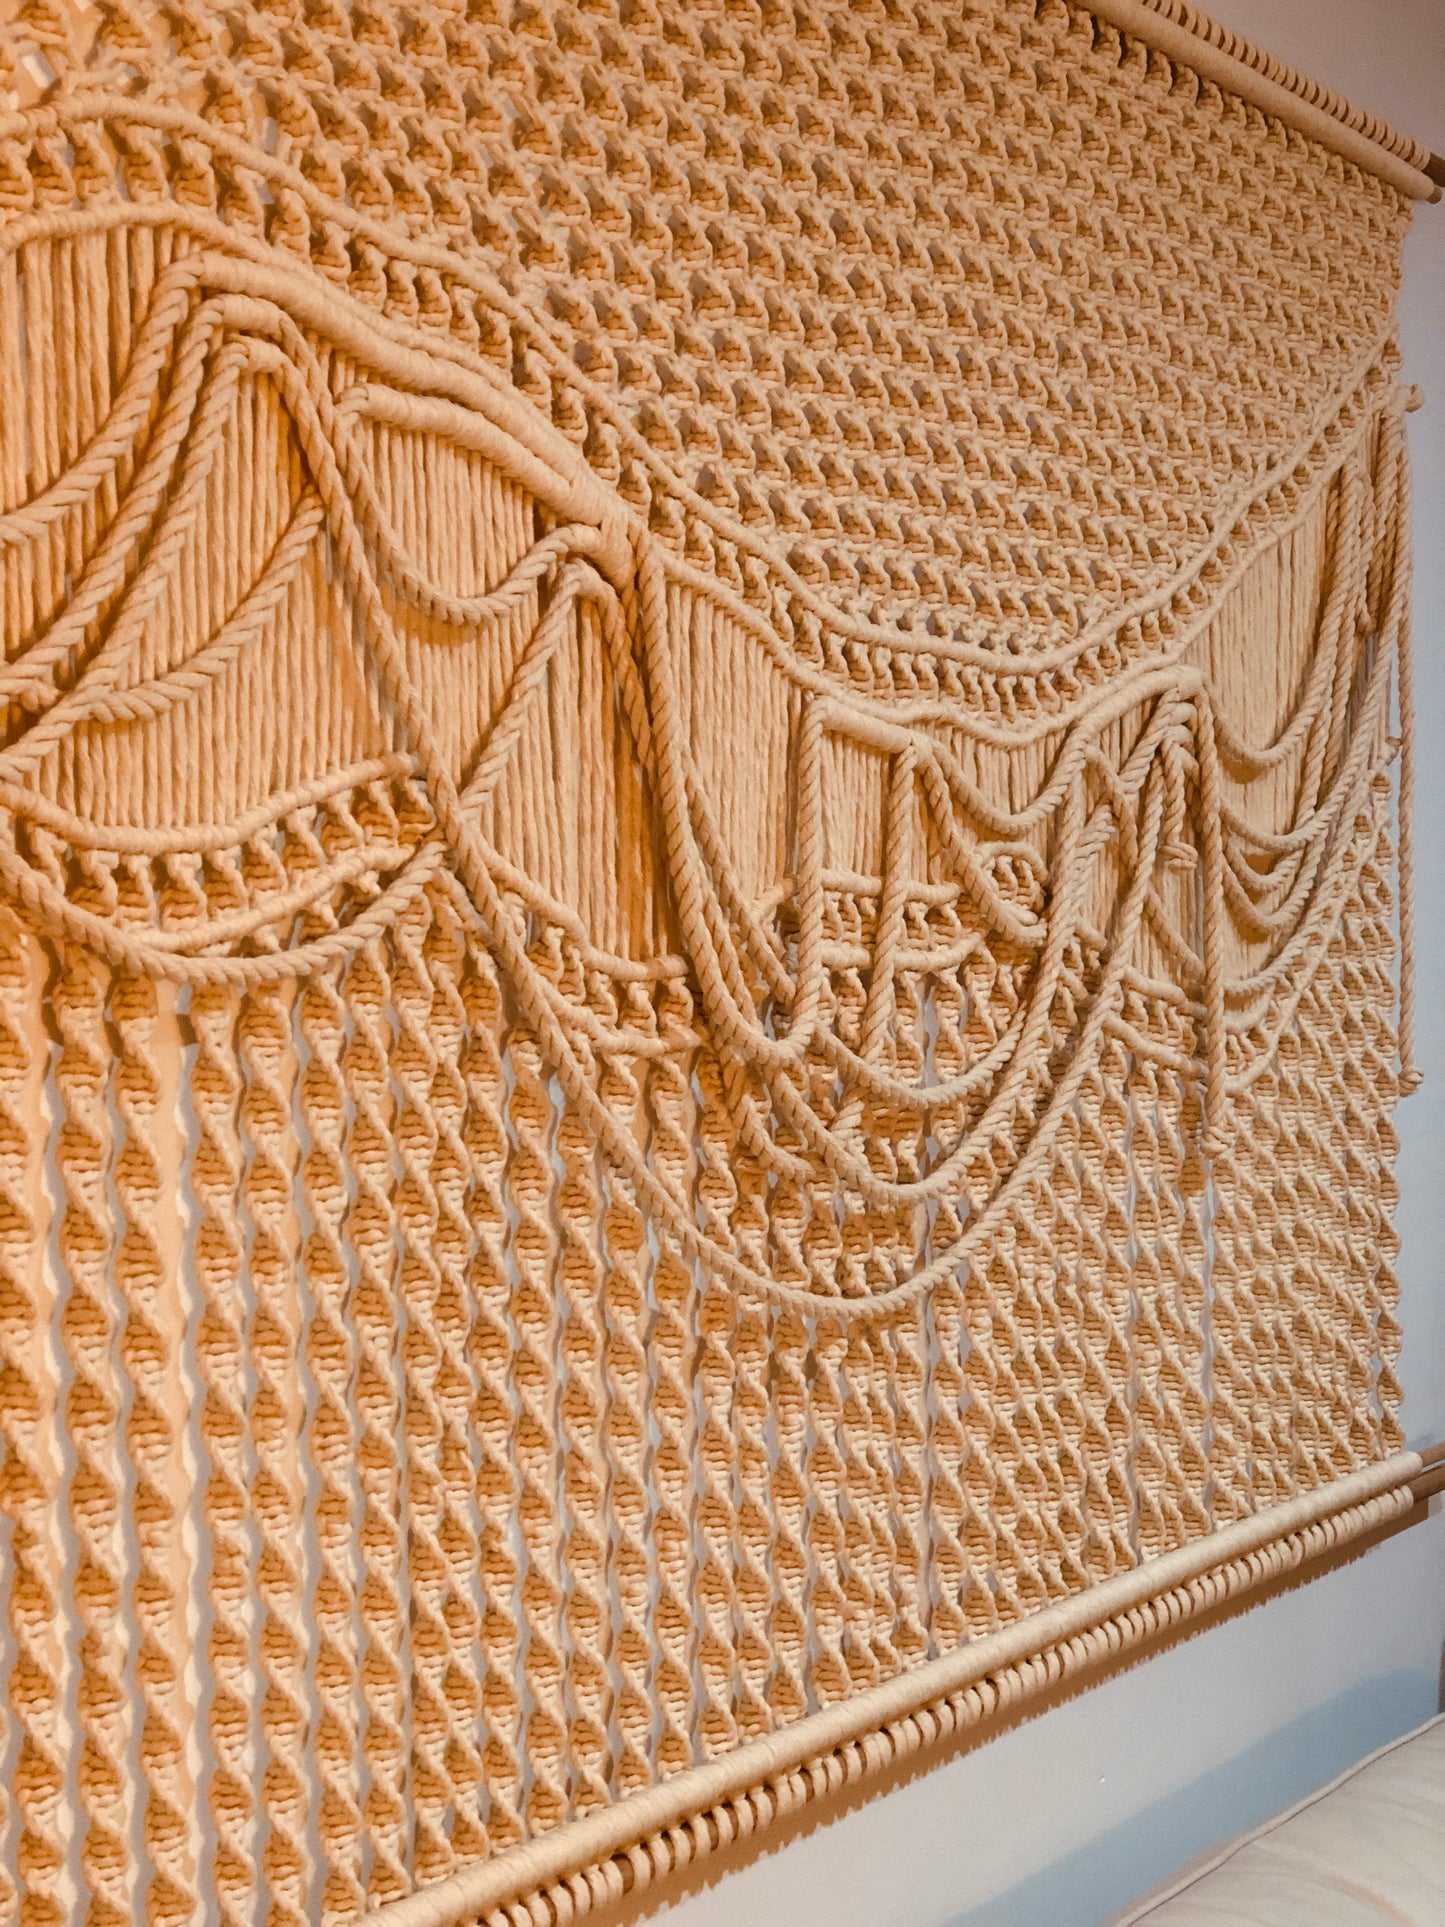 Contemporary Macrame Wall Hanging - Knotted by Hand